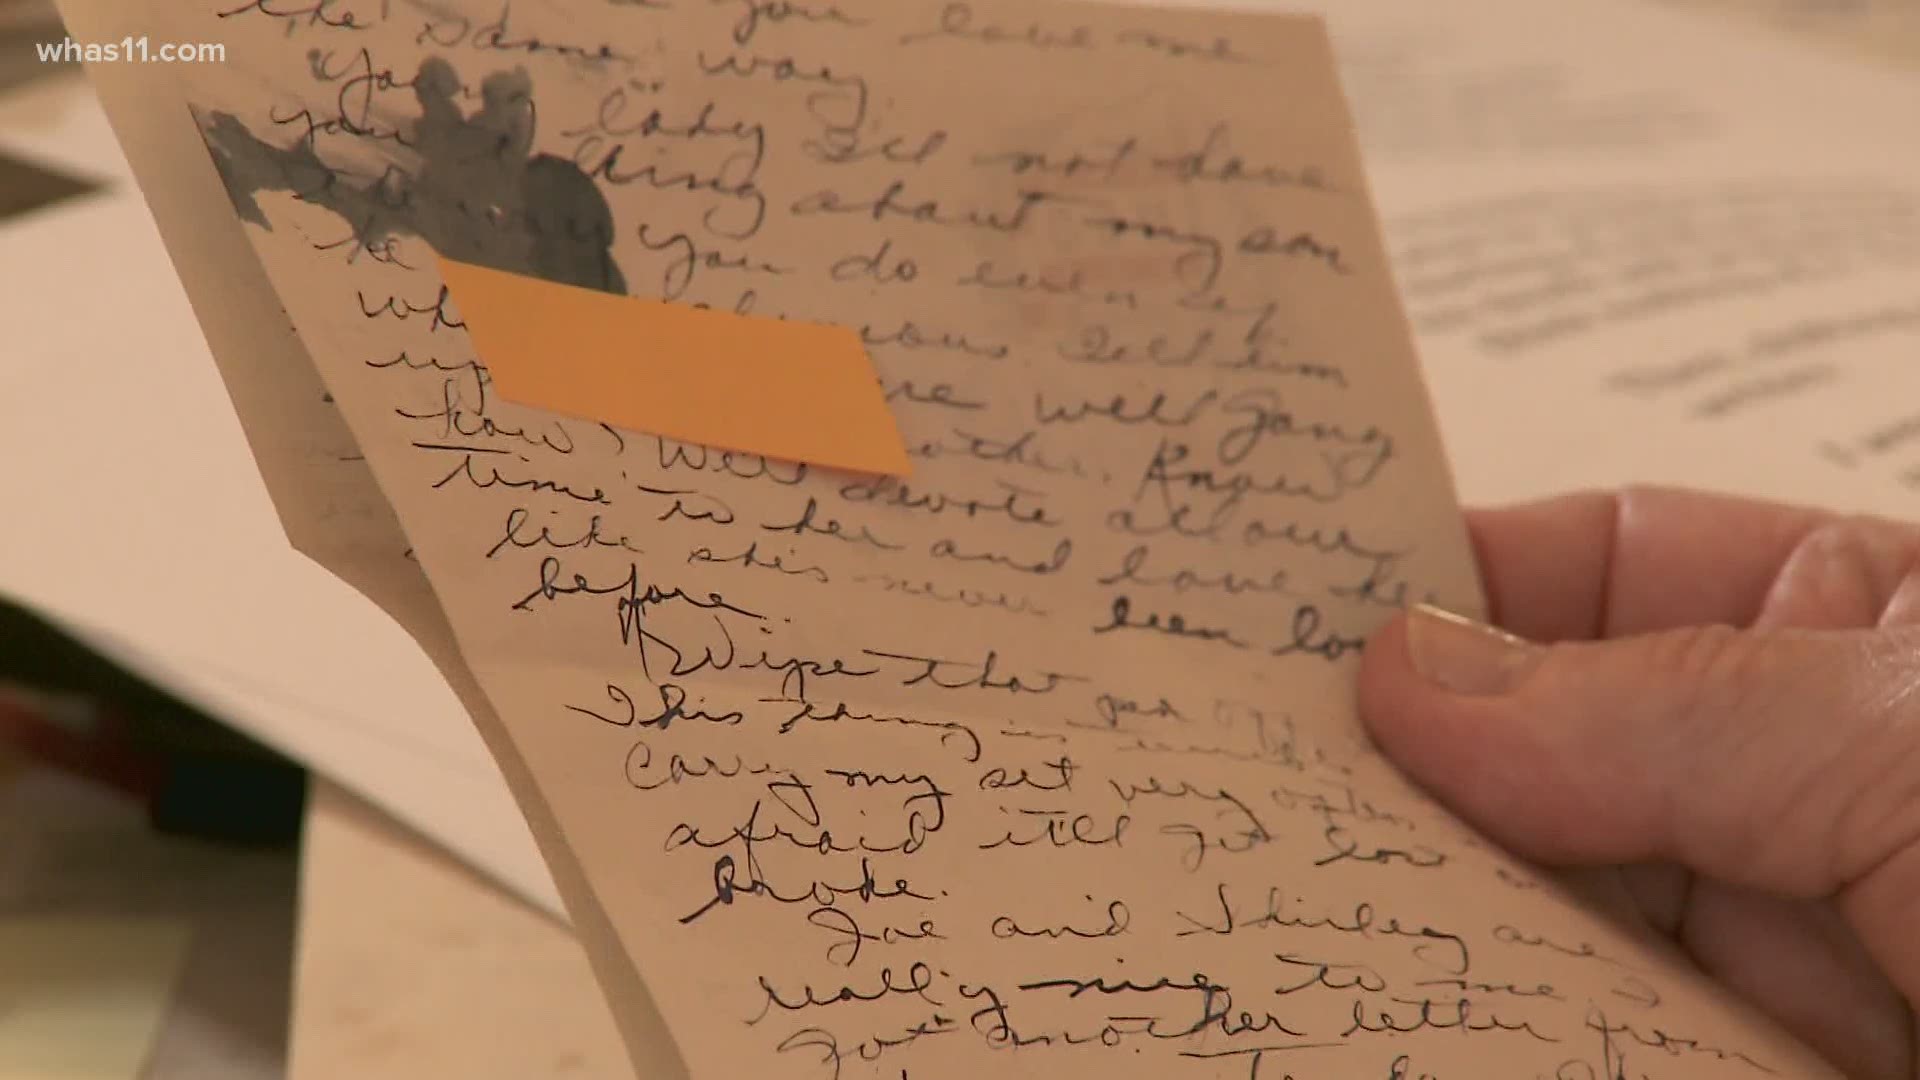 "They were just stored in here, in this potato chip can for decades." Now, those letters unsealed for the first time by Melissa Swan and her family.